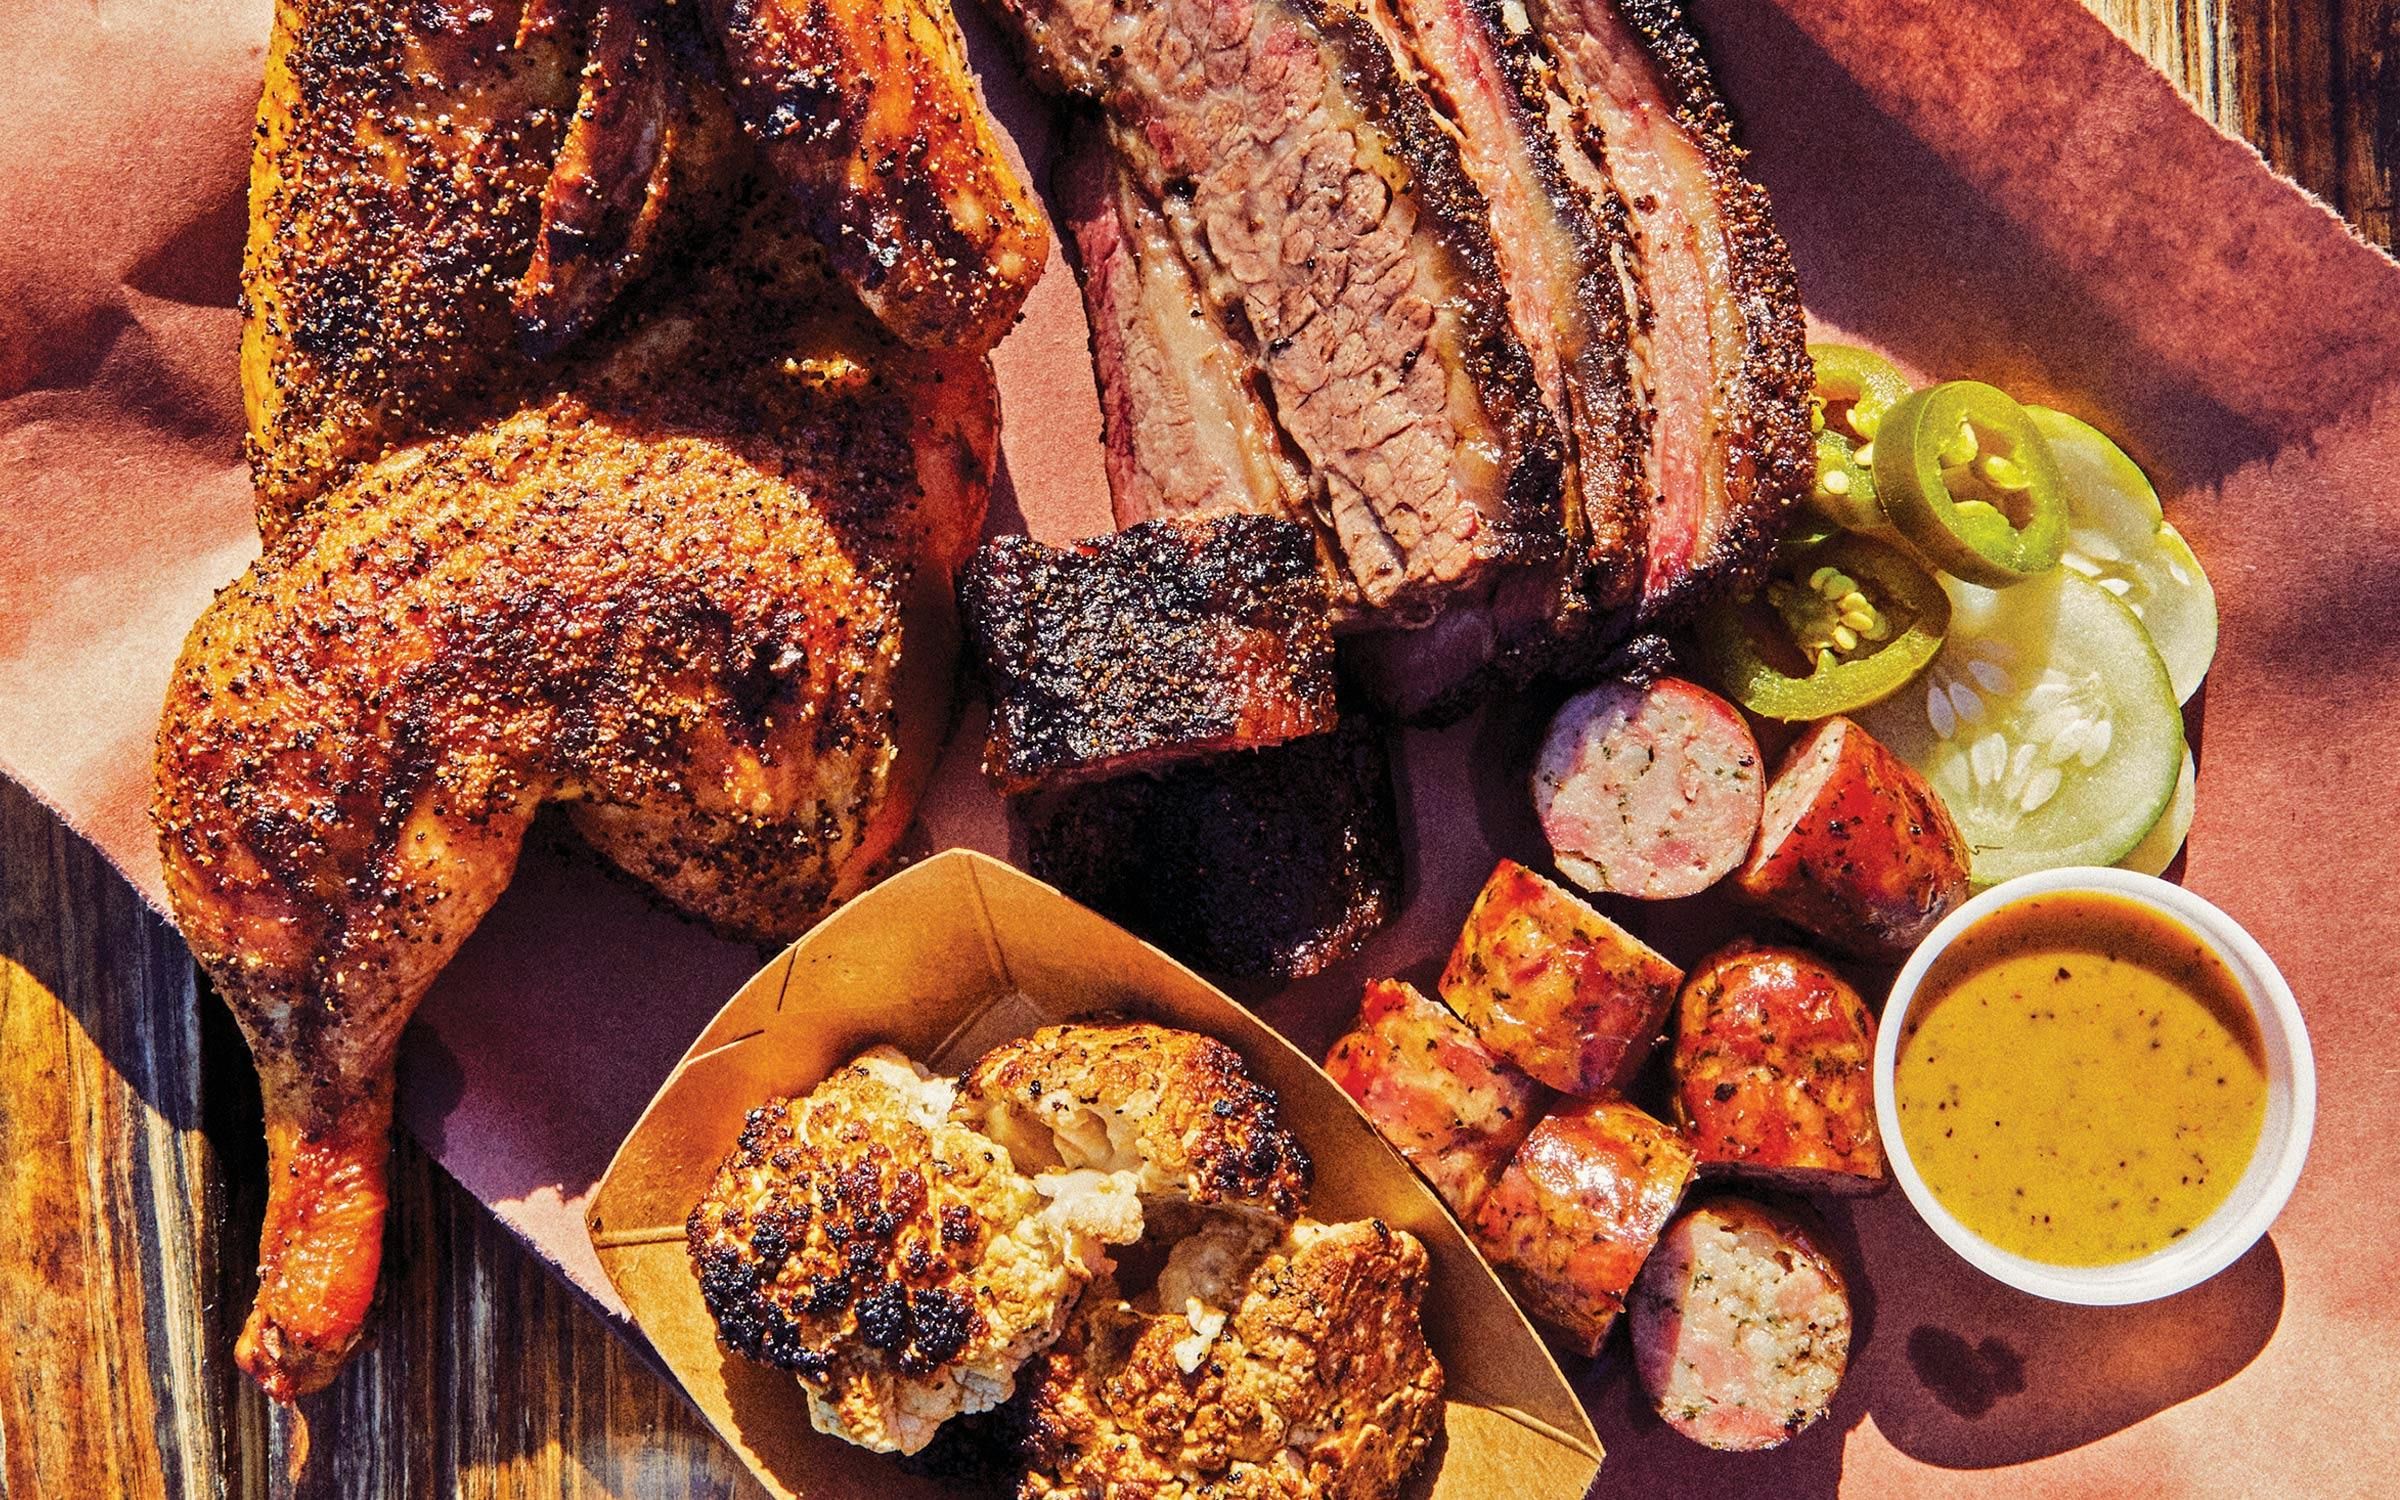 https://img.texasmonthly.com/2021/10/top-50-bbq-joints-list-feature.jpg?auto=compress&crop=faces&fit=fit&fm=pjpg&ixlib=php-3.3.1&q=45